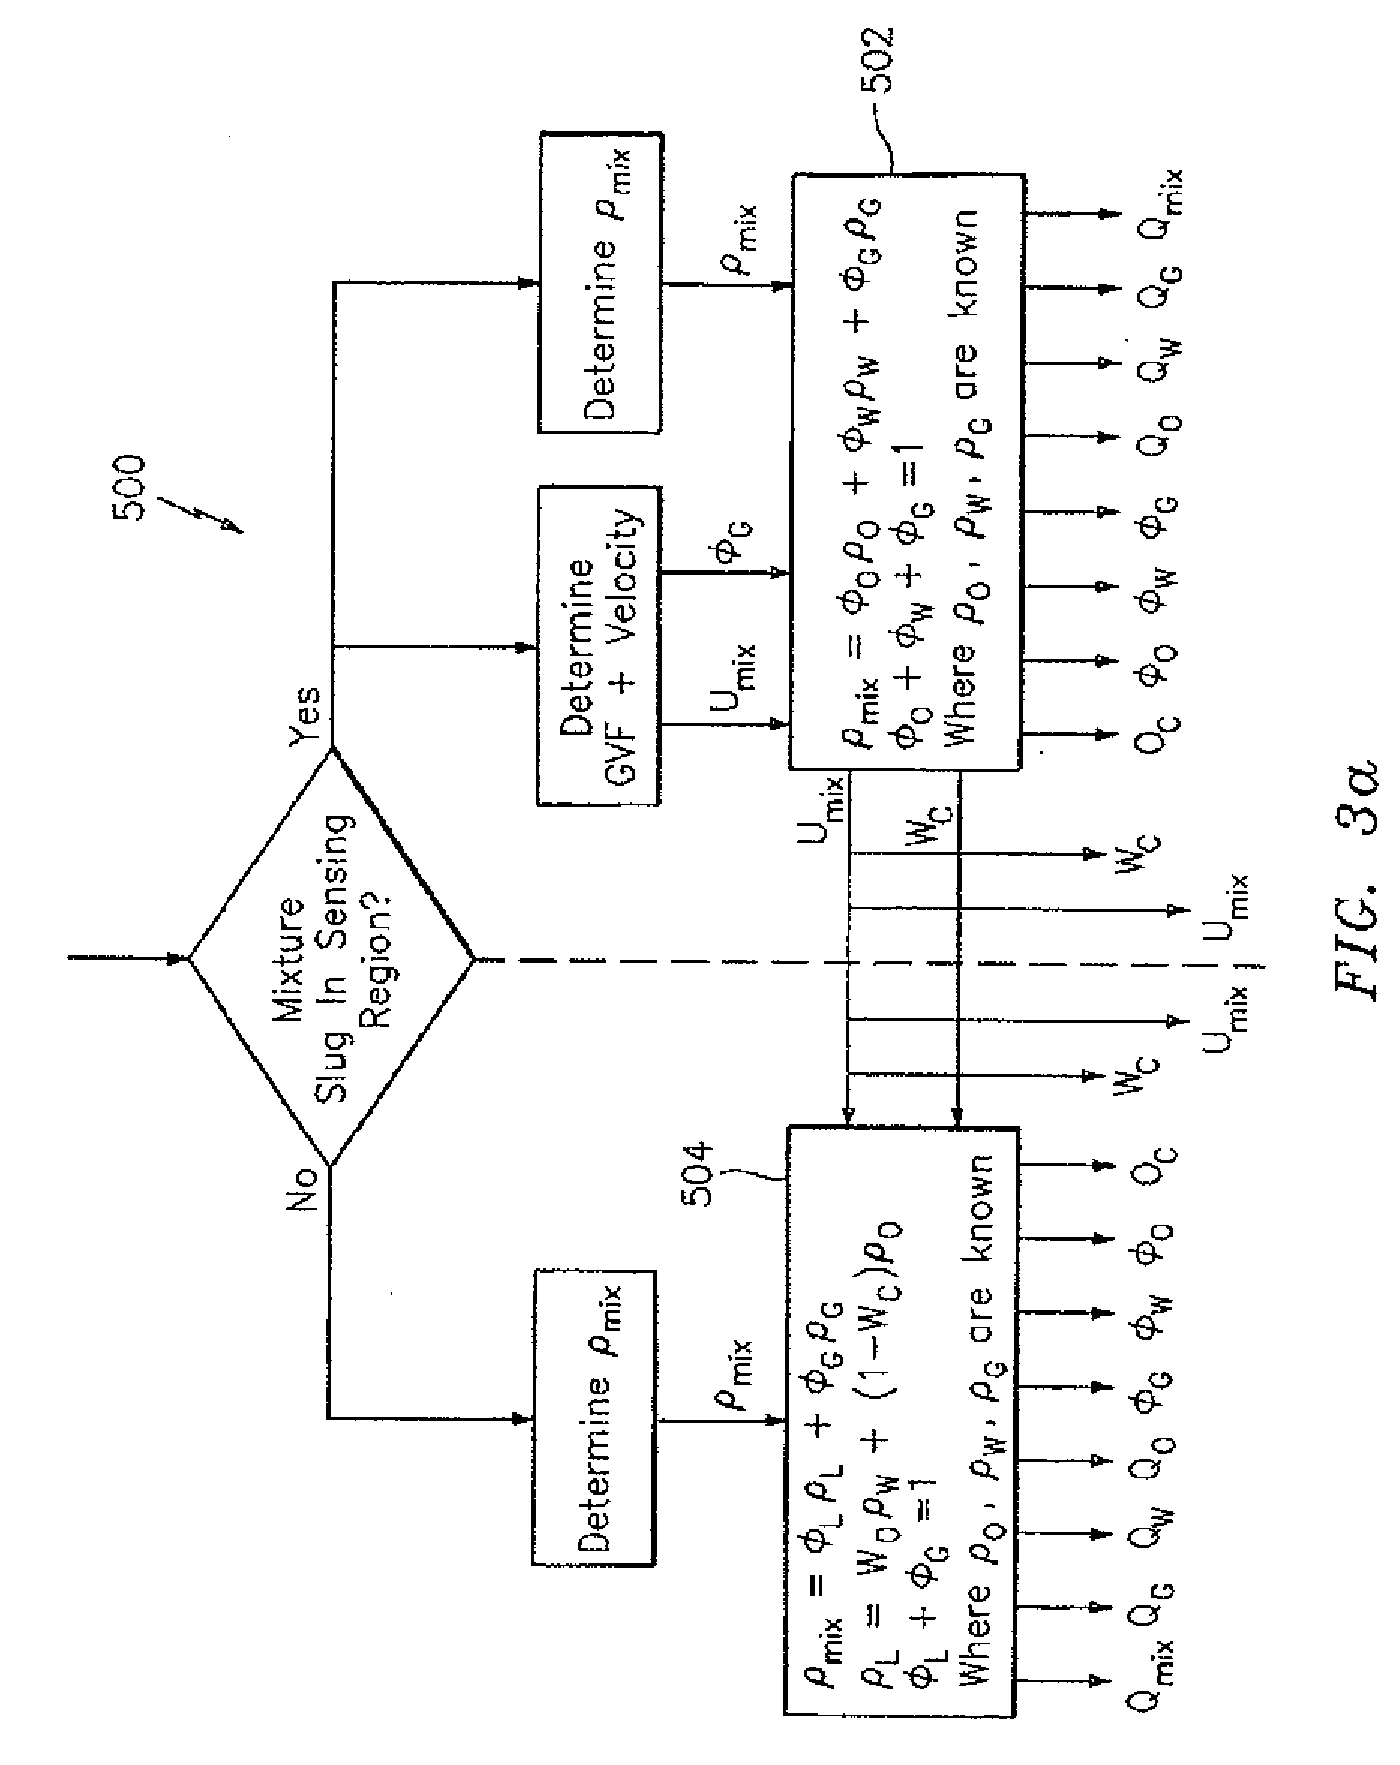 System and Method for Providing a Compositional Measurement of a Mixture Having Entrained Gas